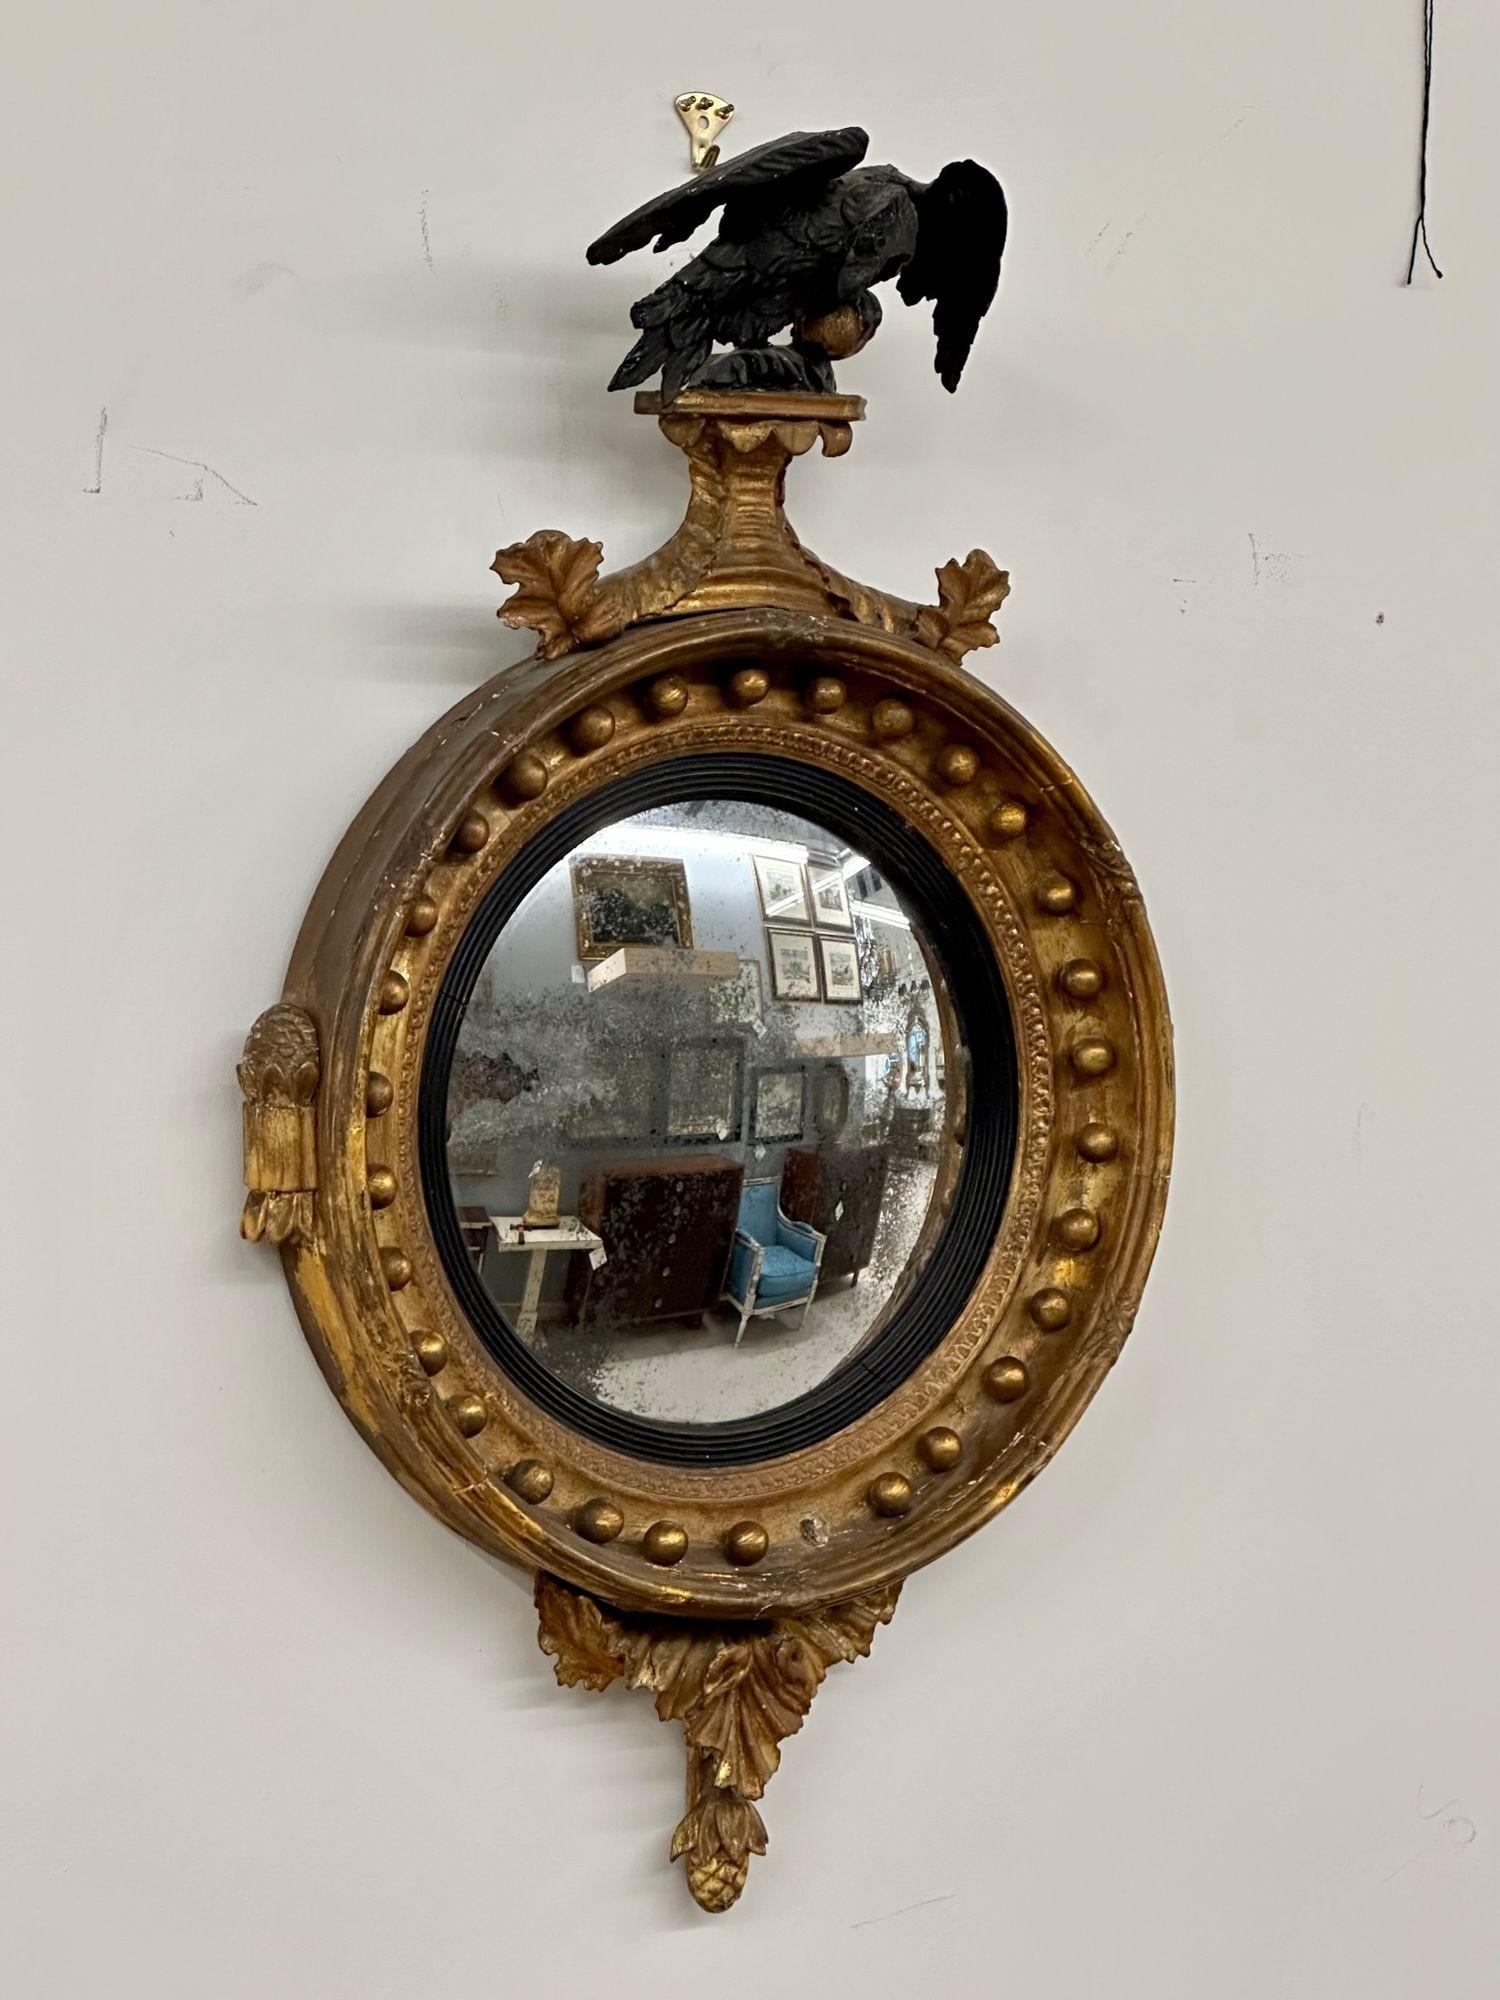 Antique Federal style gilt gold convex wall / console / pier mirror, distressed
 
Antique, Federal Style, 19th C. round wall mirror bearing a subtle convex center glass. Detailing is beautifully crafted in giltwood and ebonized wood. A